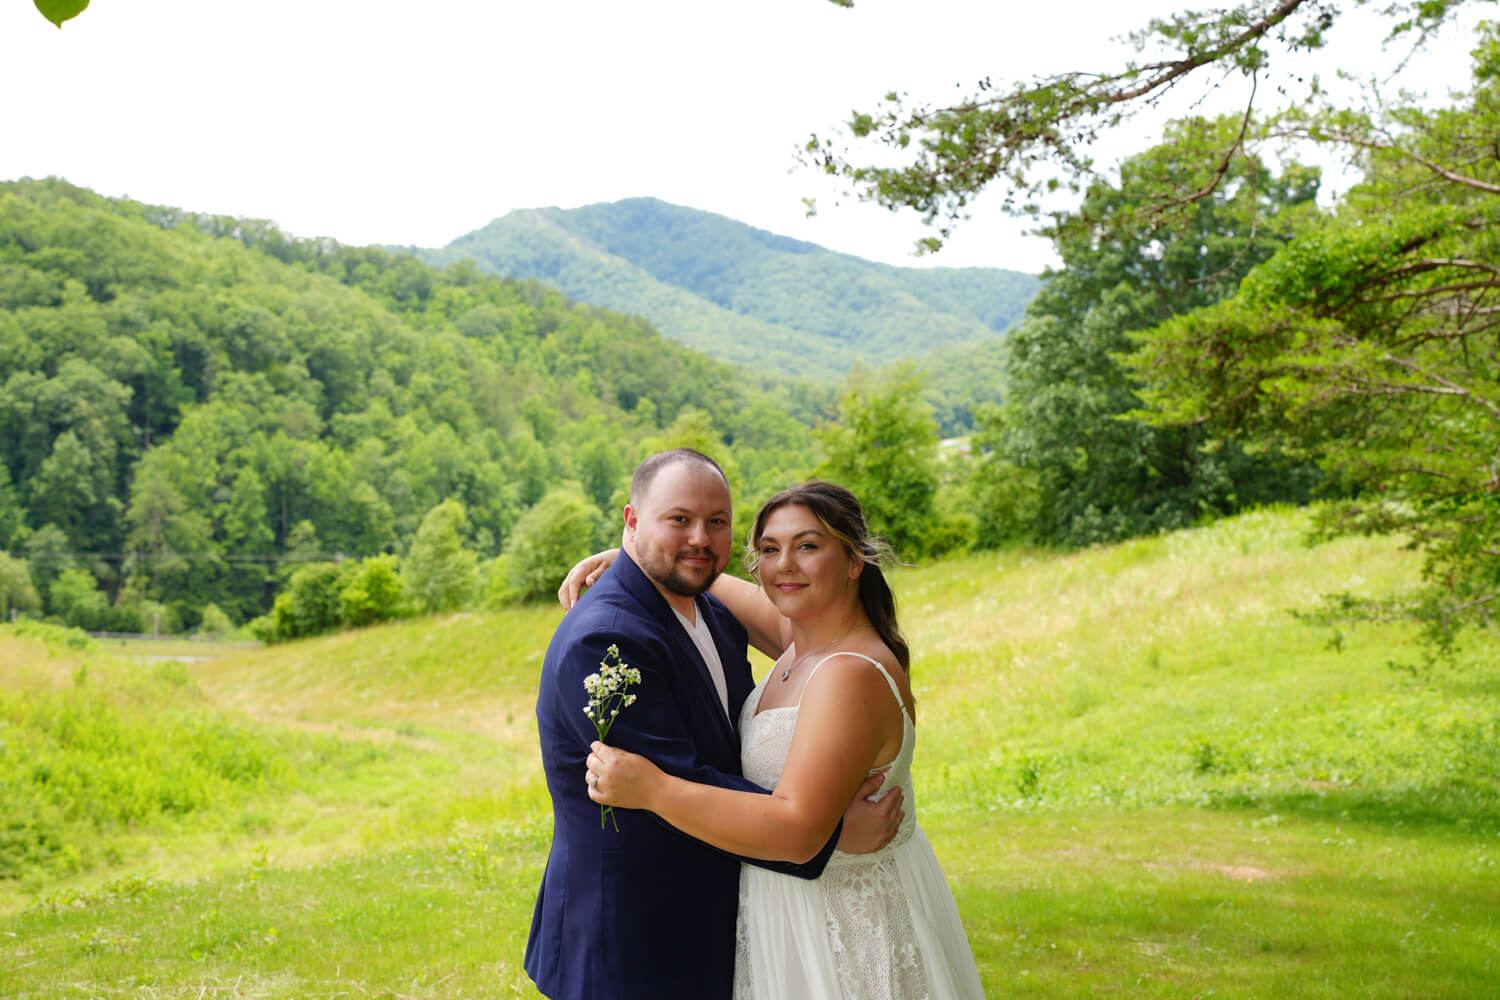 Couple holding each other closely on their wedding day for a photo at the mountain meadow view at Honeysuckle Hills